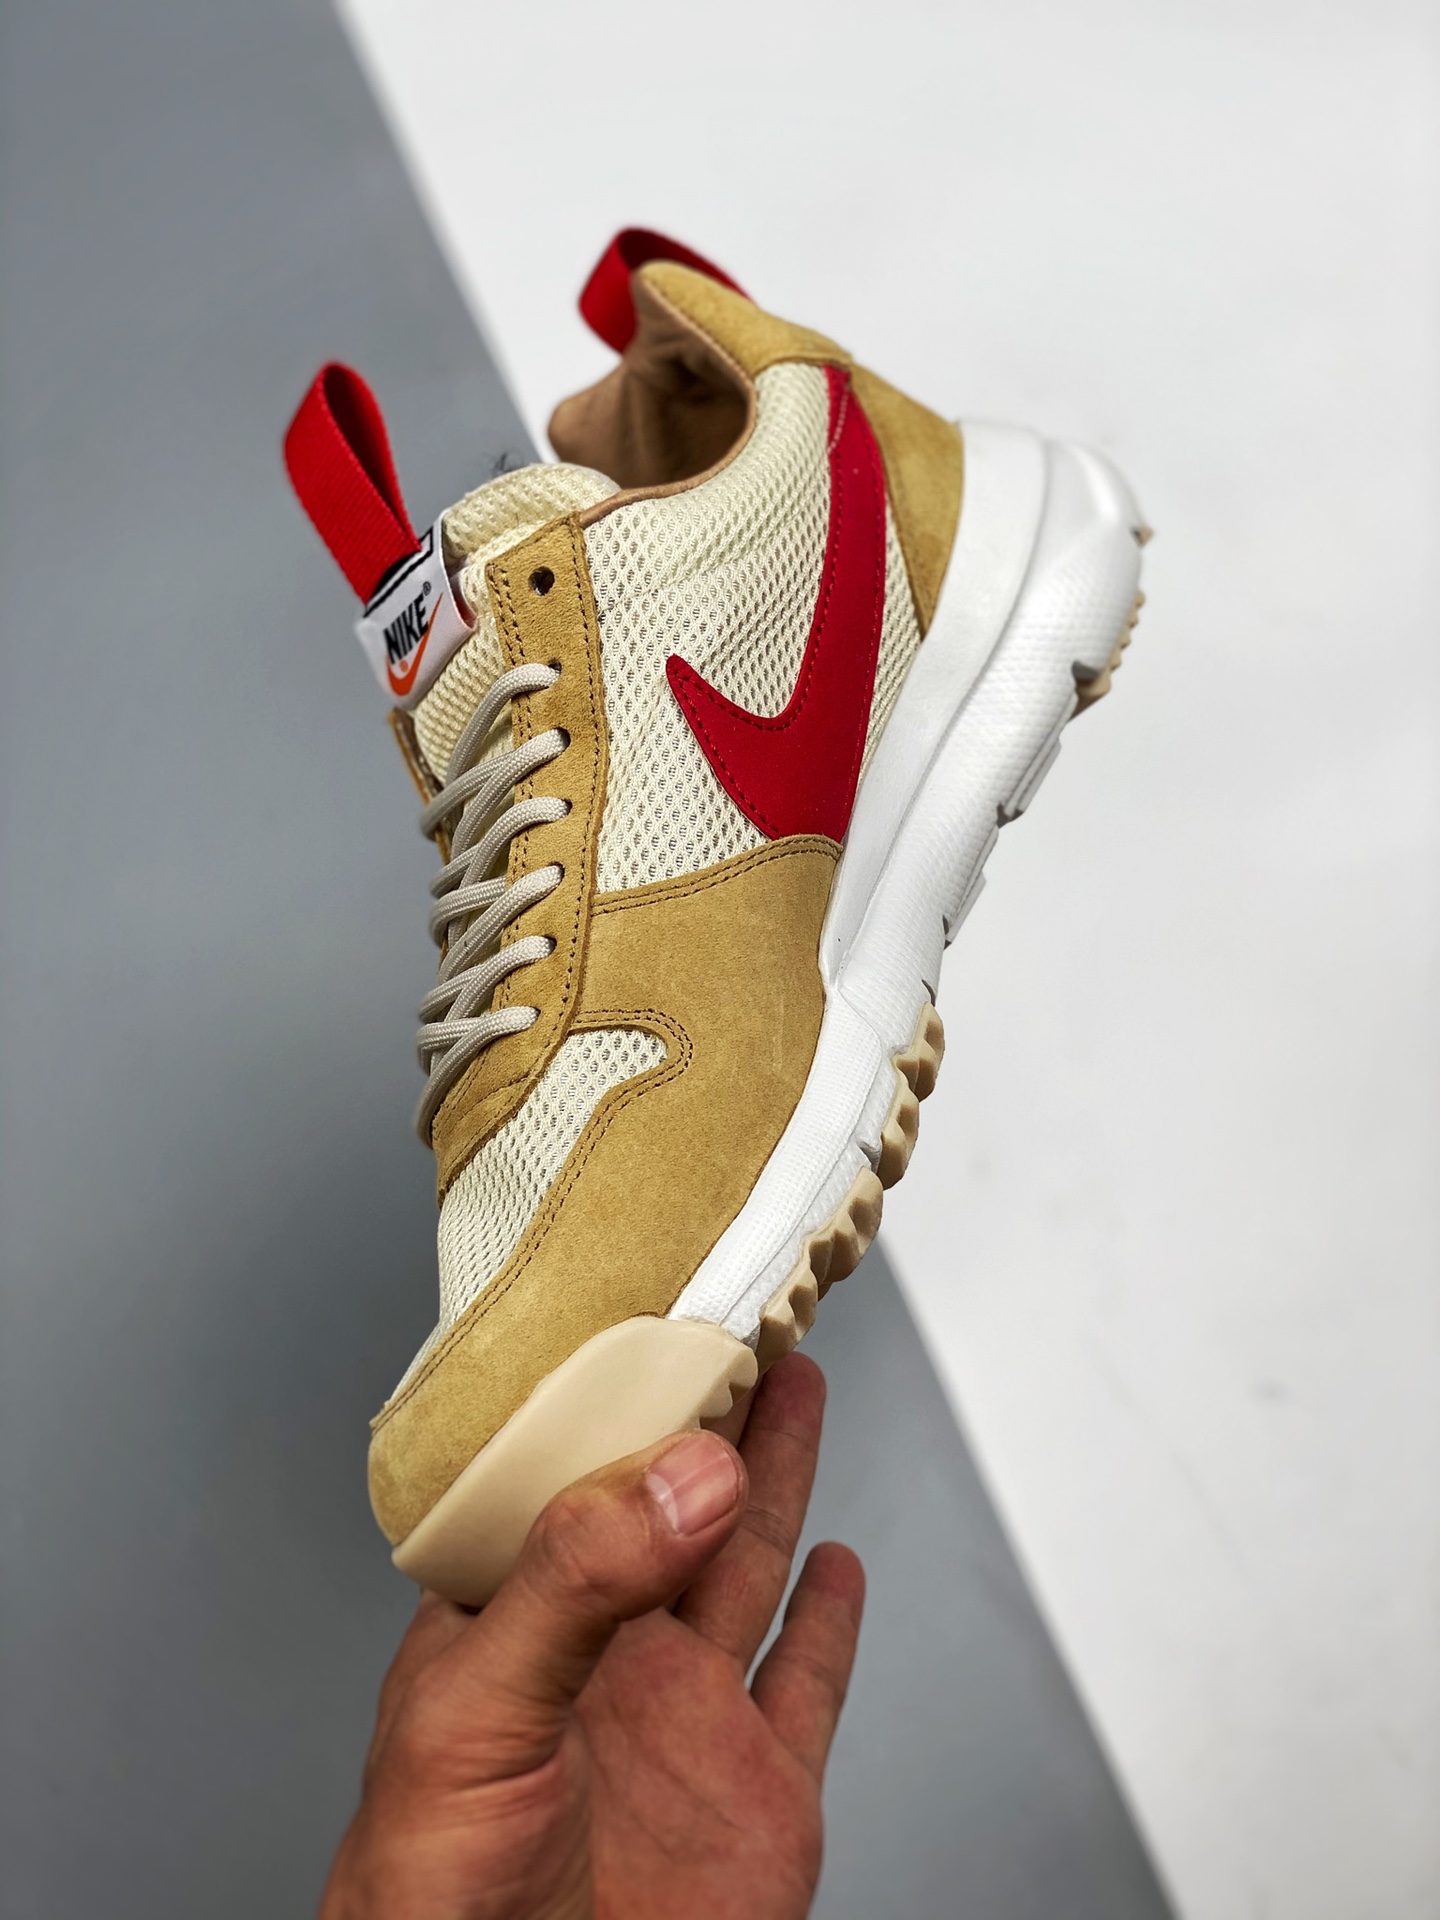 Tom Sachs x Nike Mars Yard 2.0 Natural/Red-Maple AA2261-100 - SoleSnk